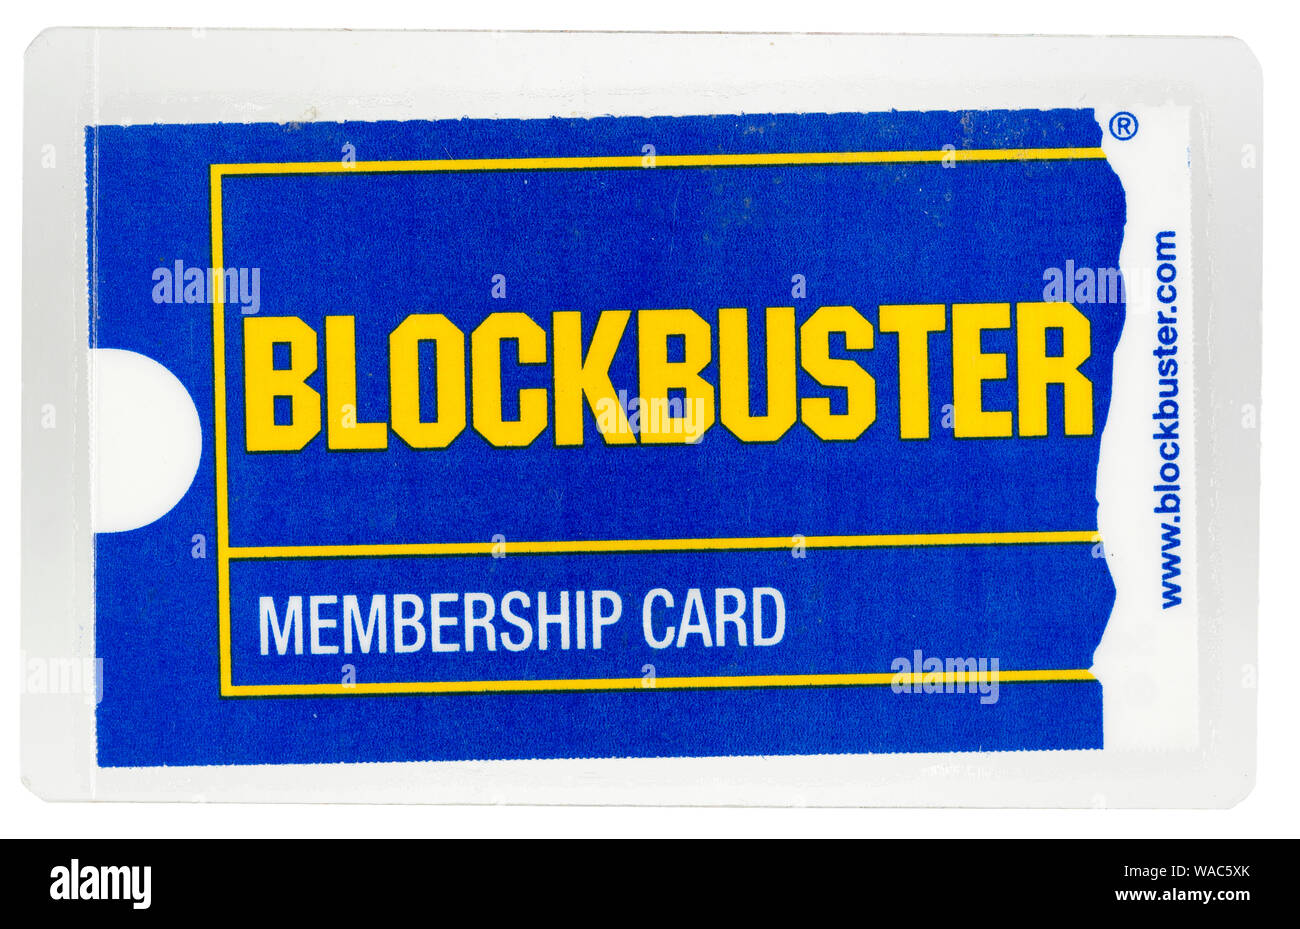 Membership card for Blockbuster LLC, also known as Blockbuster and formerly Blockbuster Video Entertainment, Inc., an American-based provider of home Stock Photo